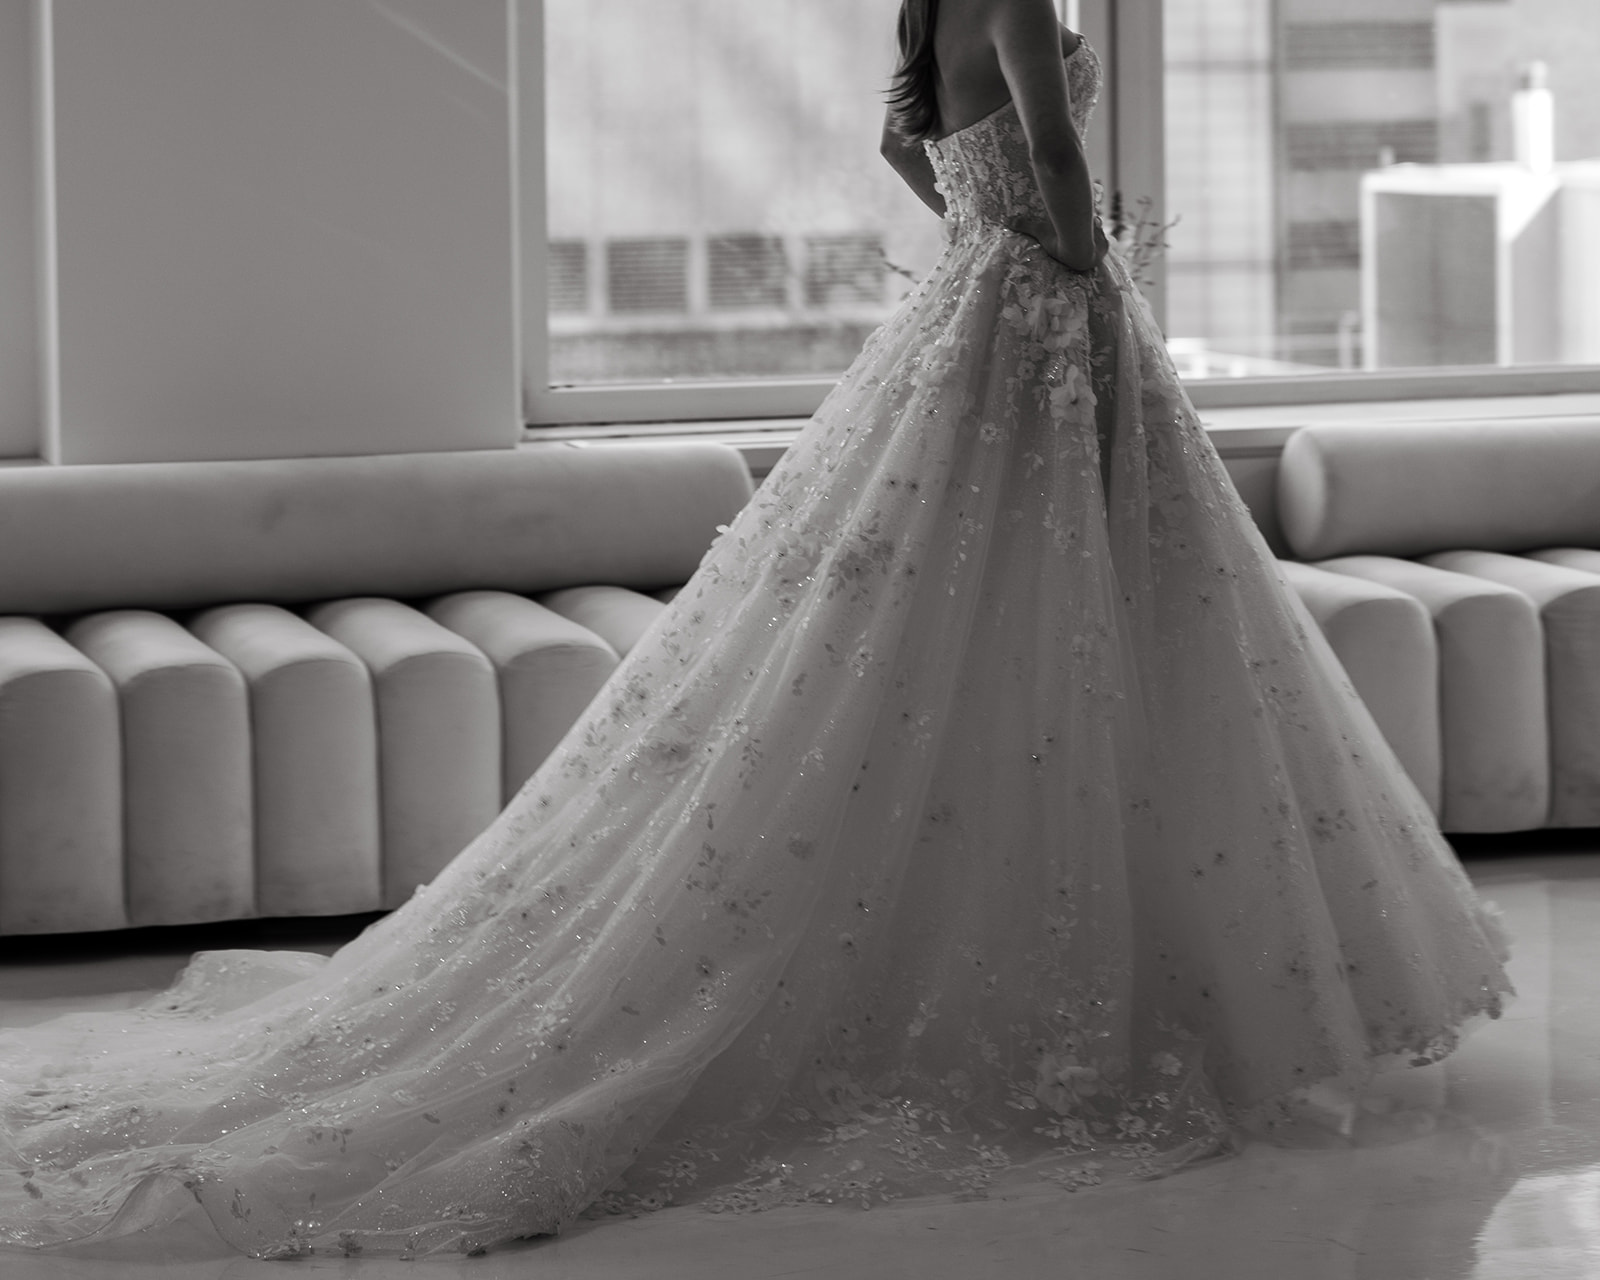 Wedding Dresses & Bridal Gowns - Largest Selection at Kleinfeld